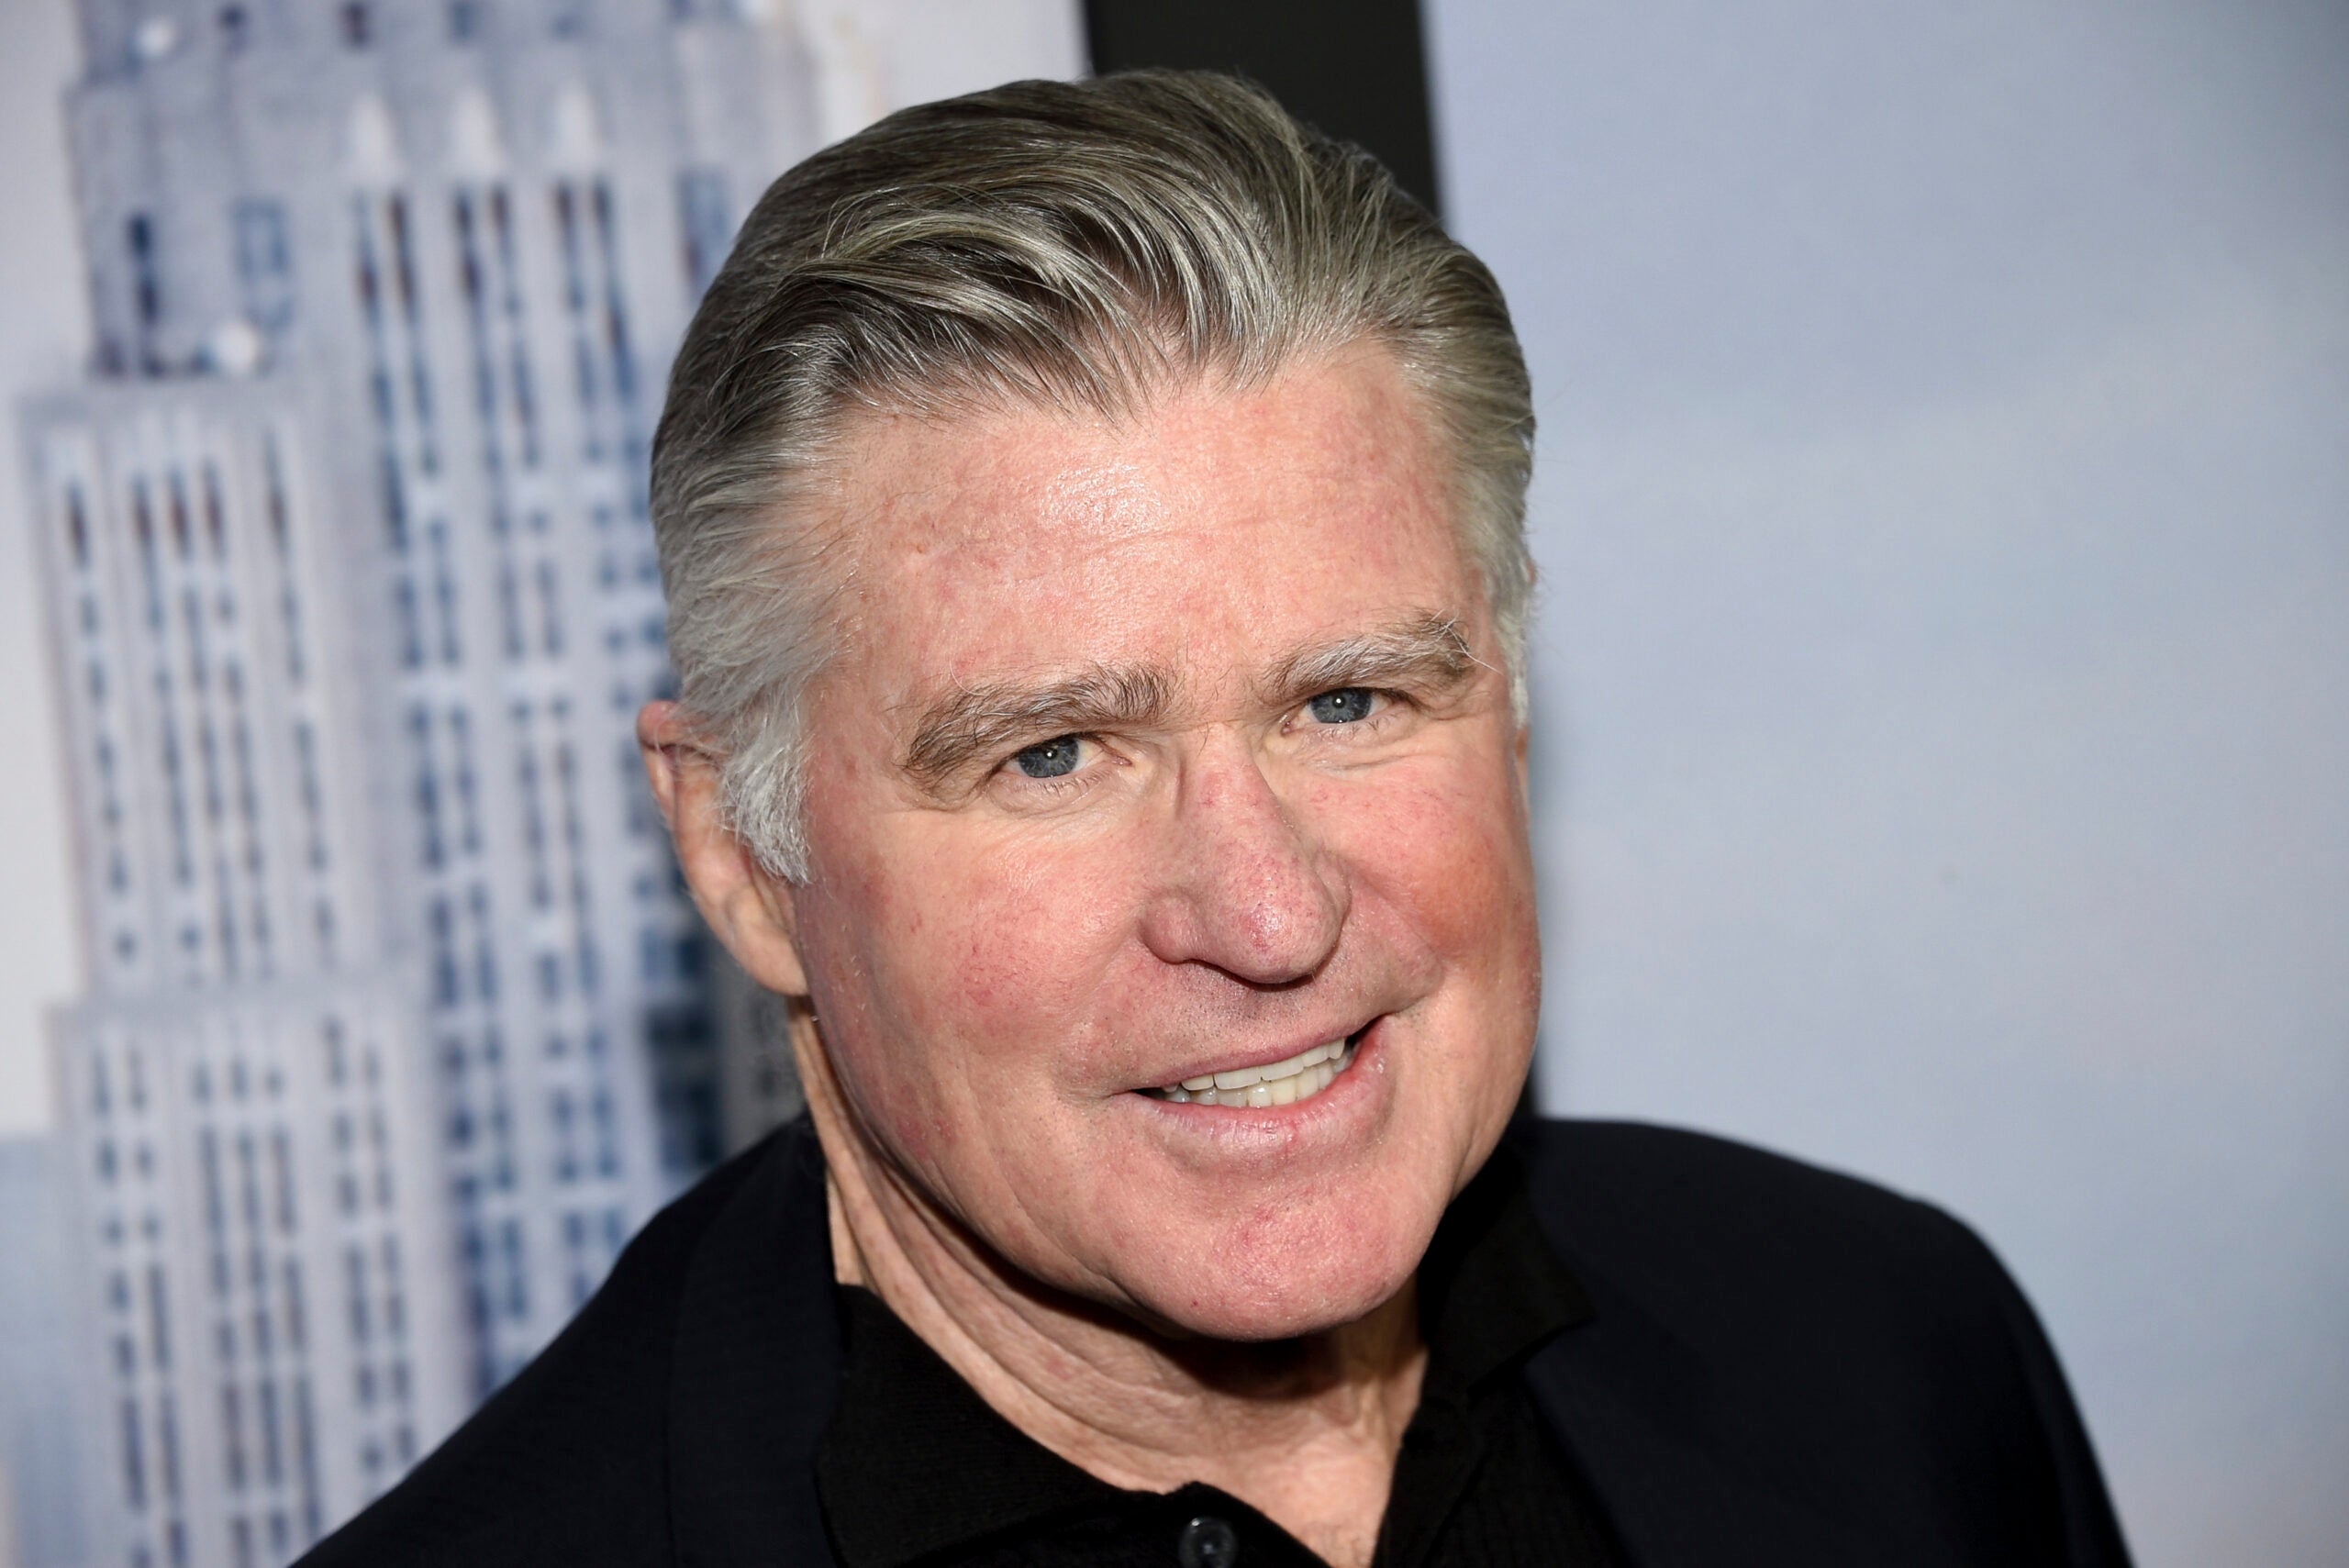 Actor Treat Williams attends the world premiere of "Second Act" in New York on Dec. 12, 2018.